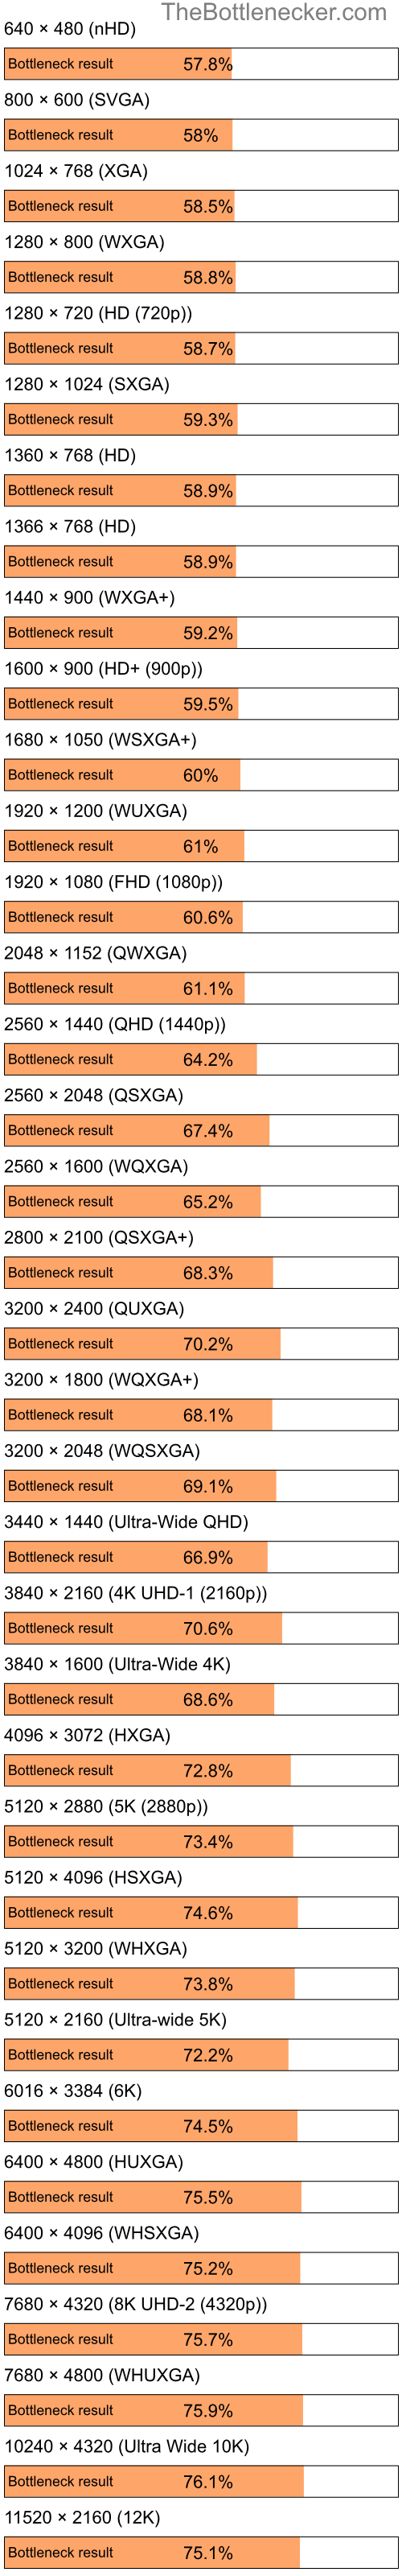 Bottleneck results by resolution for Intel Pentium 4 and NVIDIA GeForce 6610 XL in Processor Intense Tasks